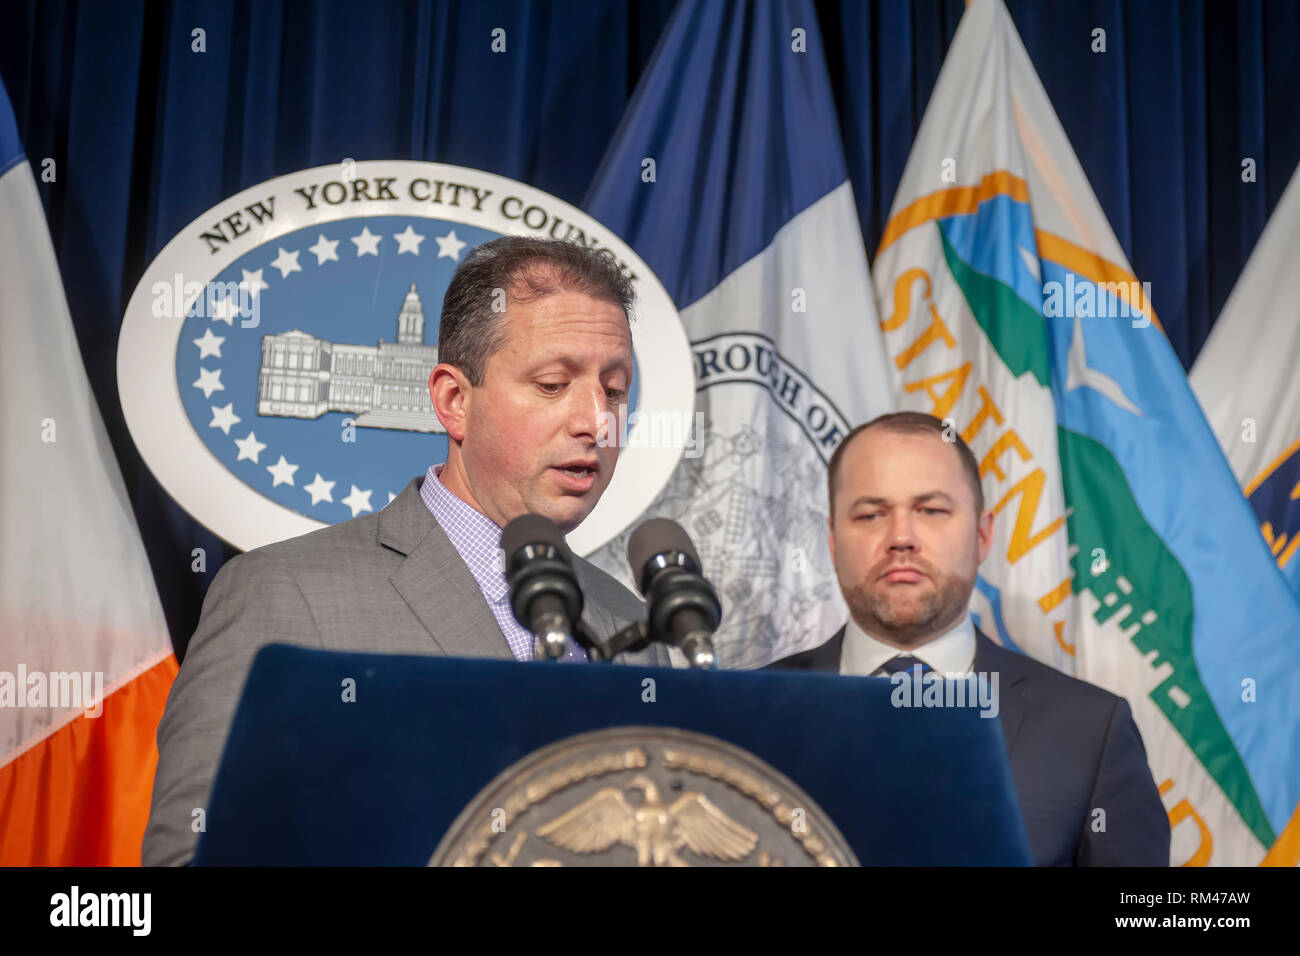 New York, USA. 13th Feb, 2019. New York City Council Member Brad Lander, left, and Speaker and Acting Public Advocate Corey Johnson at a news conference on Wednesday, February 13, 2019 in the Red Room of New York City Hall. Besides speaking about pending legislation Johnson spoke about allegedly homophobic remarks made by Council Member Ruben Diaz Sr. and the Speaker's plan to dissolve the FHV Committee of which Diaz is the chairman. ( © Richard B. Levine) Credit: Richard Levine/Alamy Live News Stock Photo